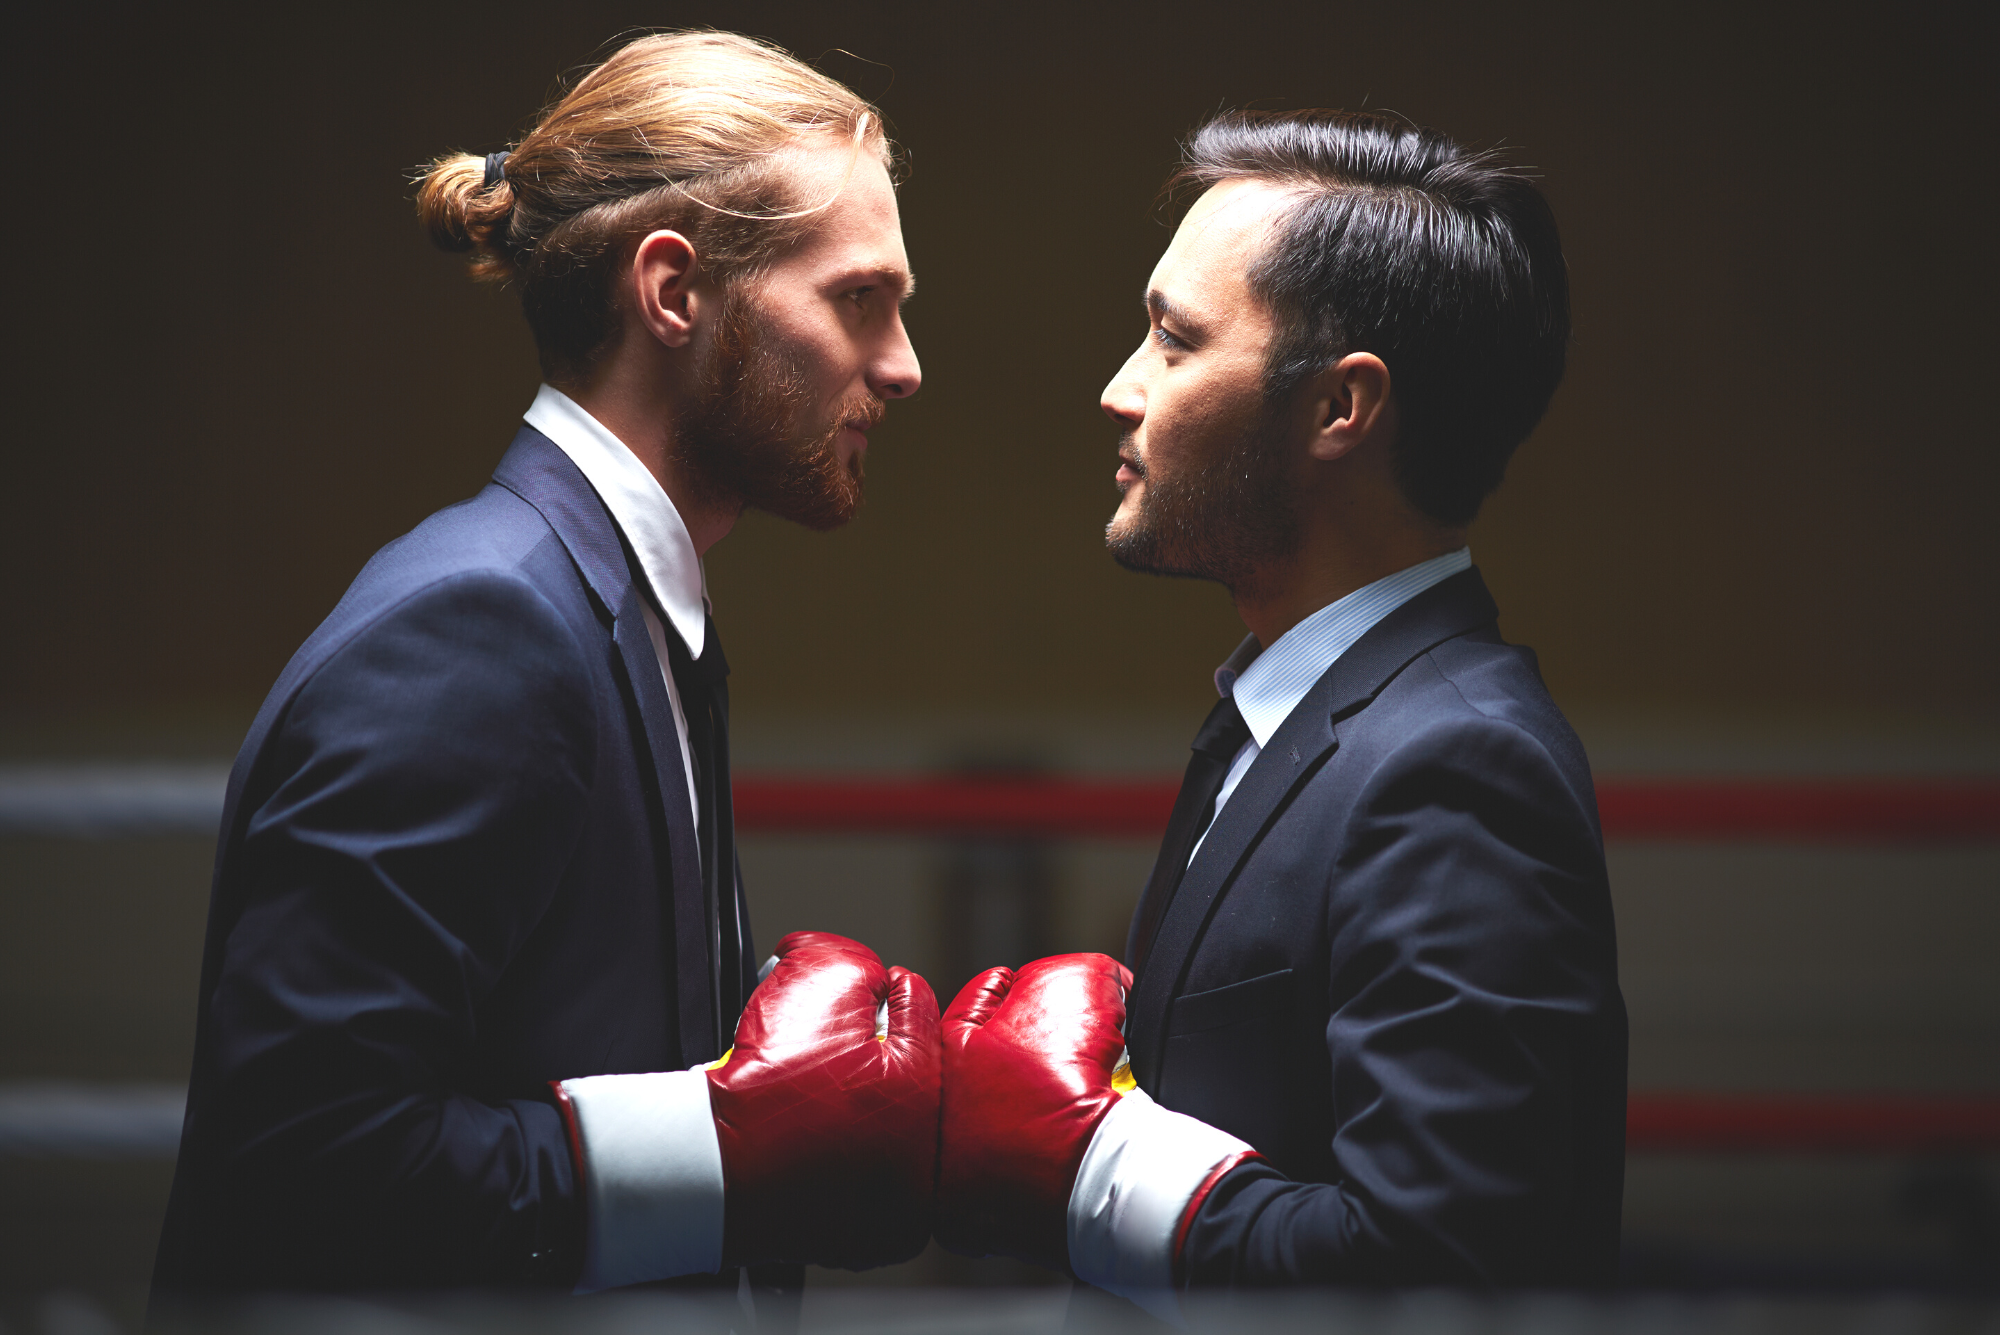 Two businessmen wearing boxing gloves stand face to face, representing competitive business.